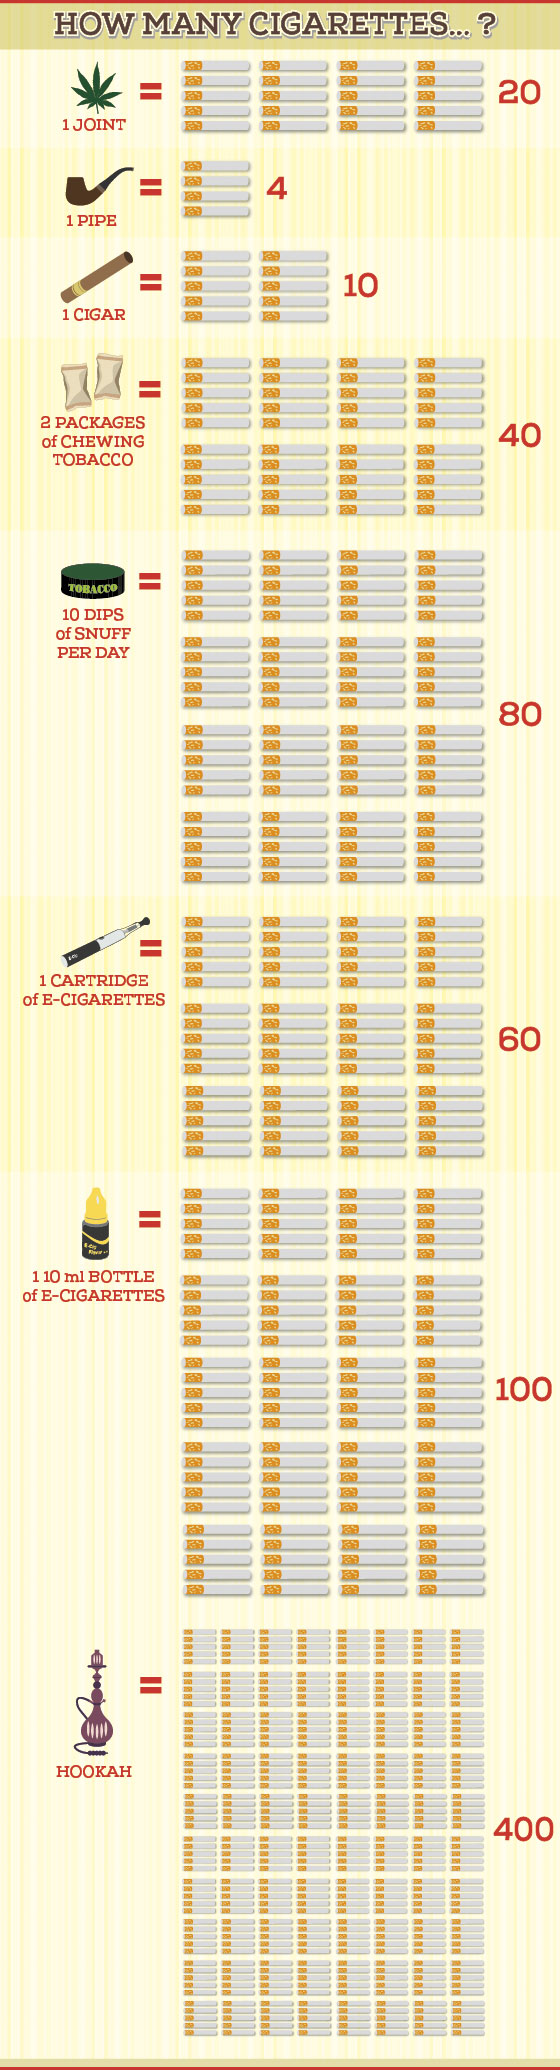 How Many Cigarettes Infographic